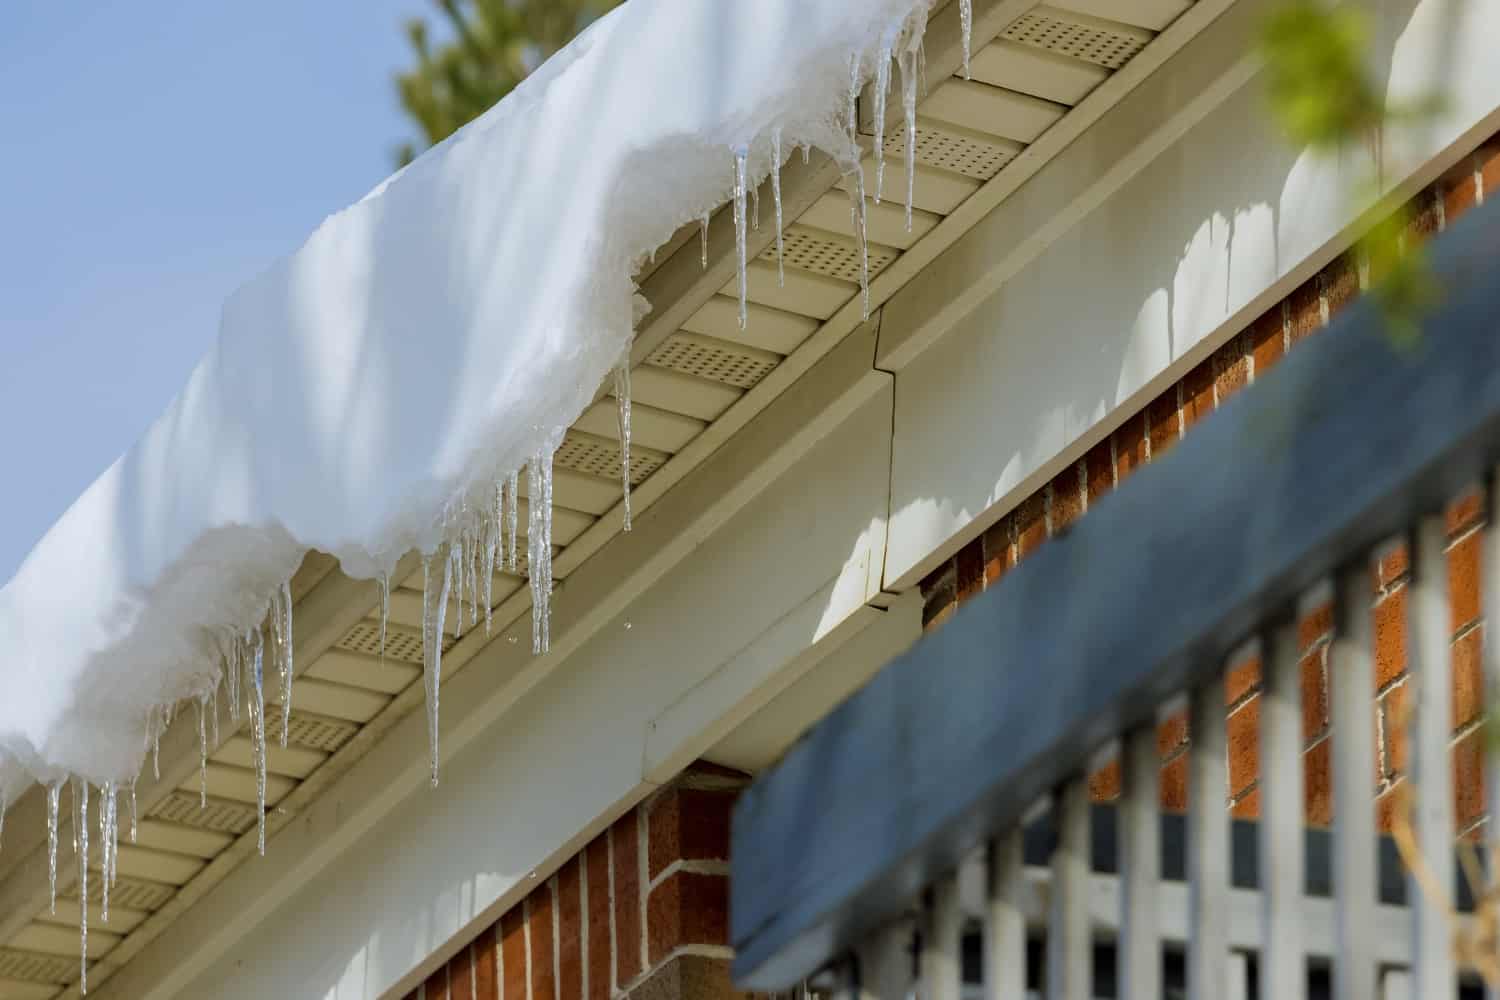 Snow and frozen icicles hang over the gutters of a home.